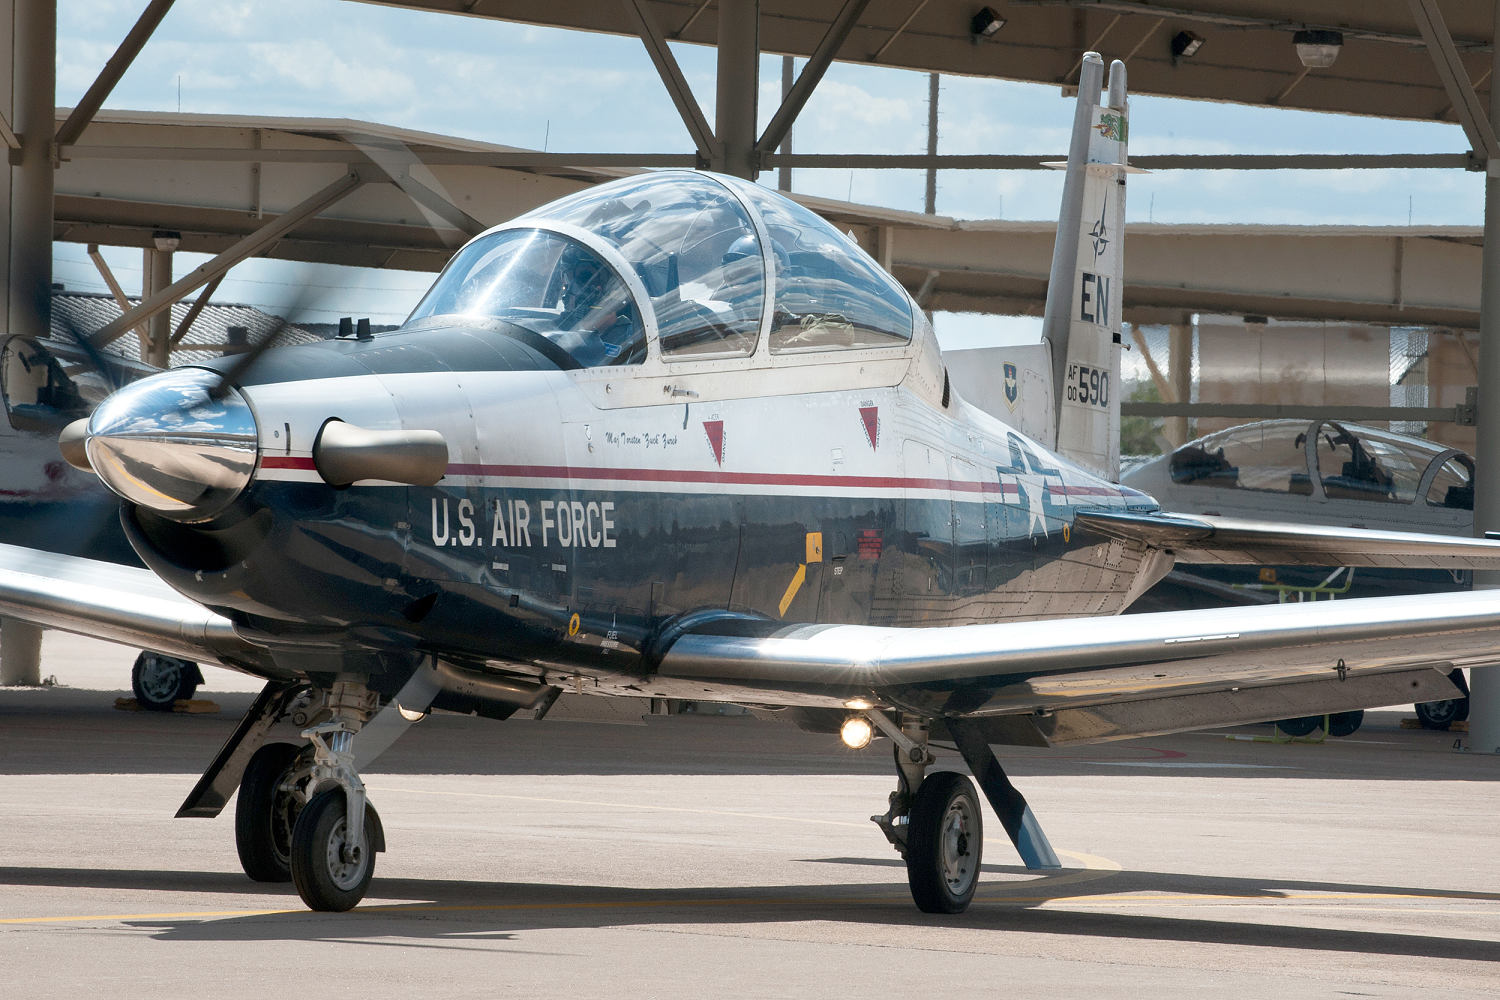 Air Force instructor dies after ejection seat goes off while plane is on the ground